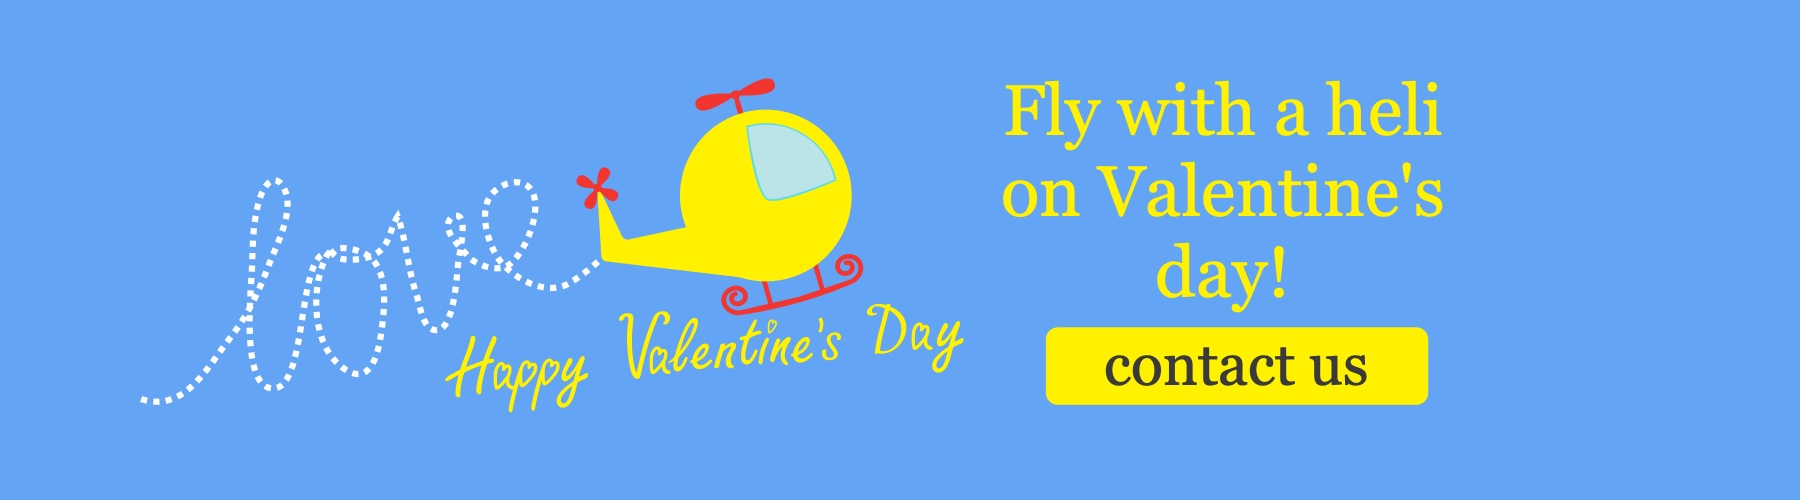 valentines day helicopter 2020